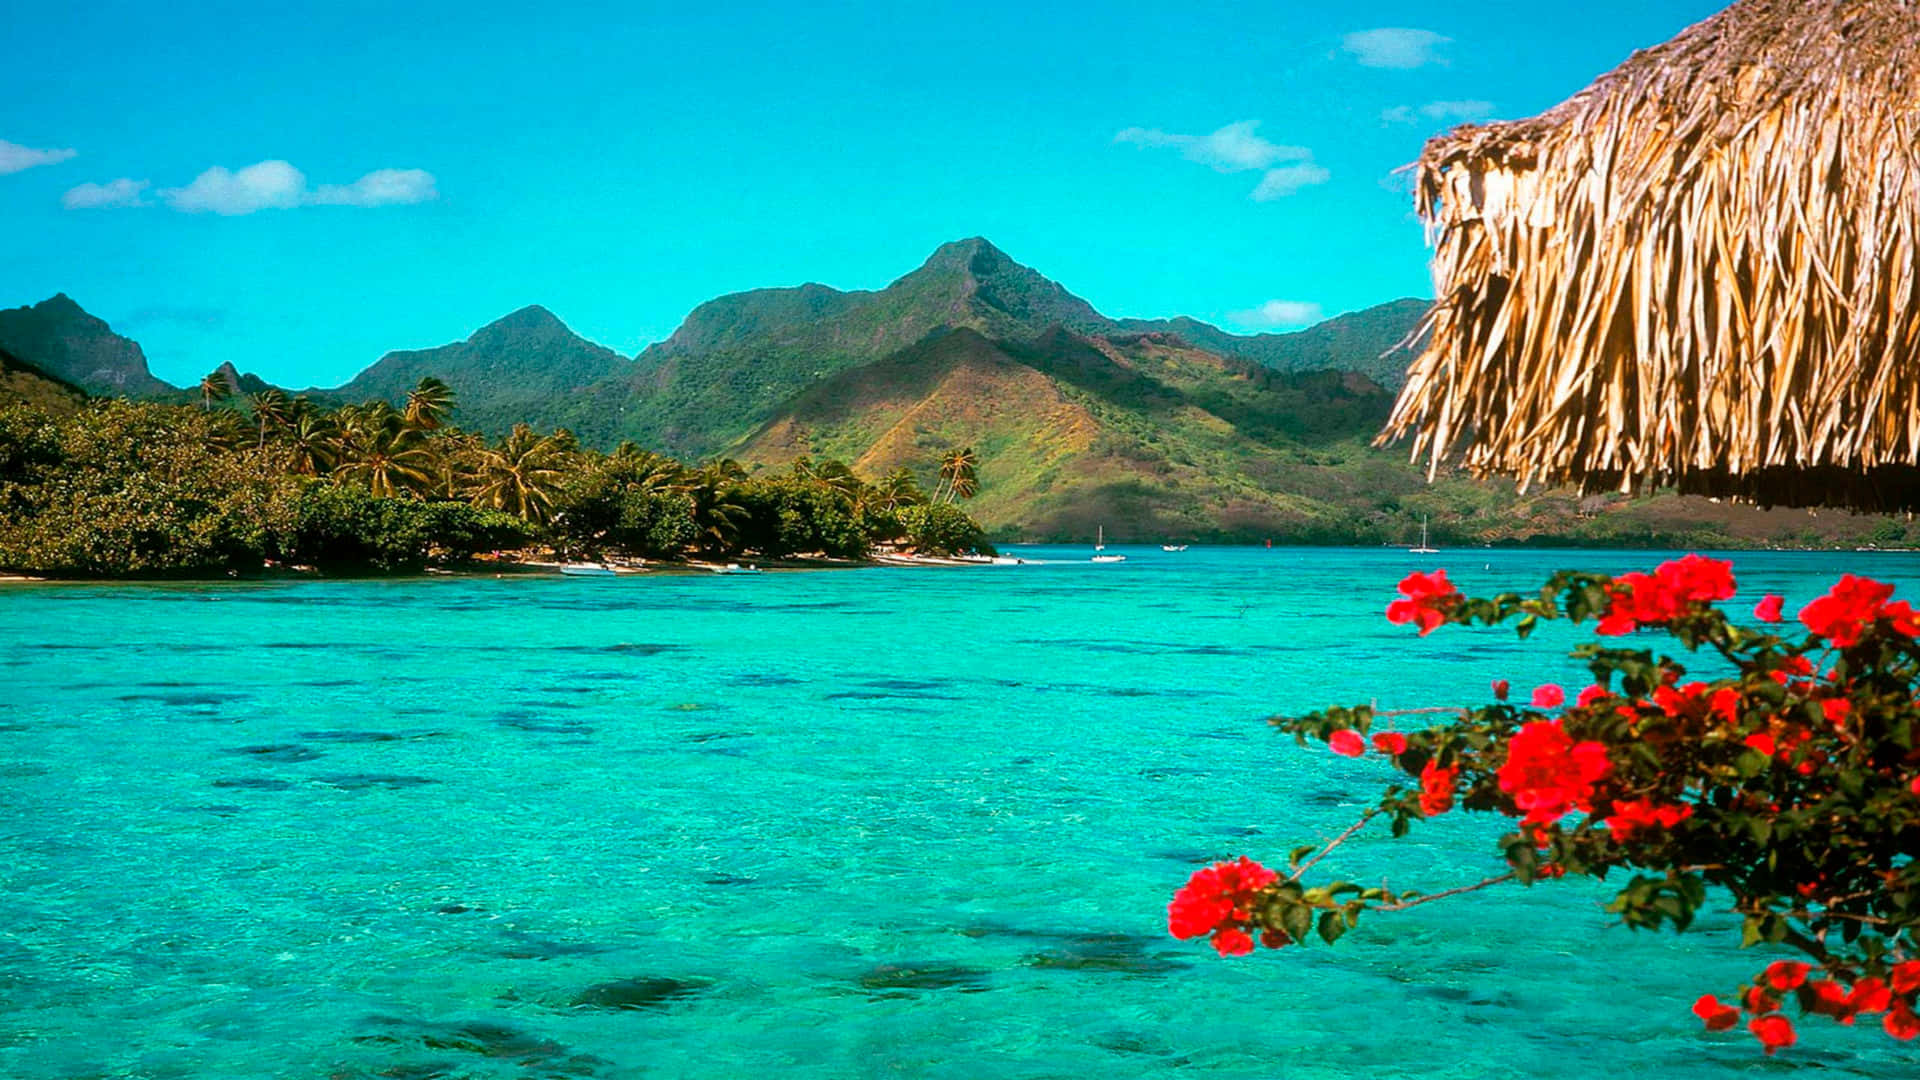 Feel the Calm and Serenity of a Tropical Island Wallpaper